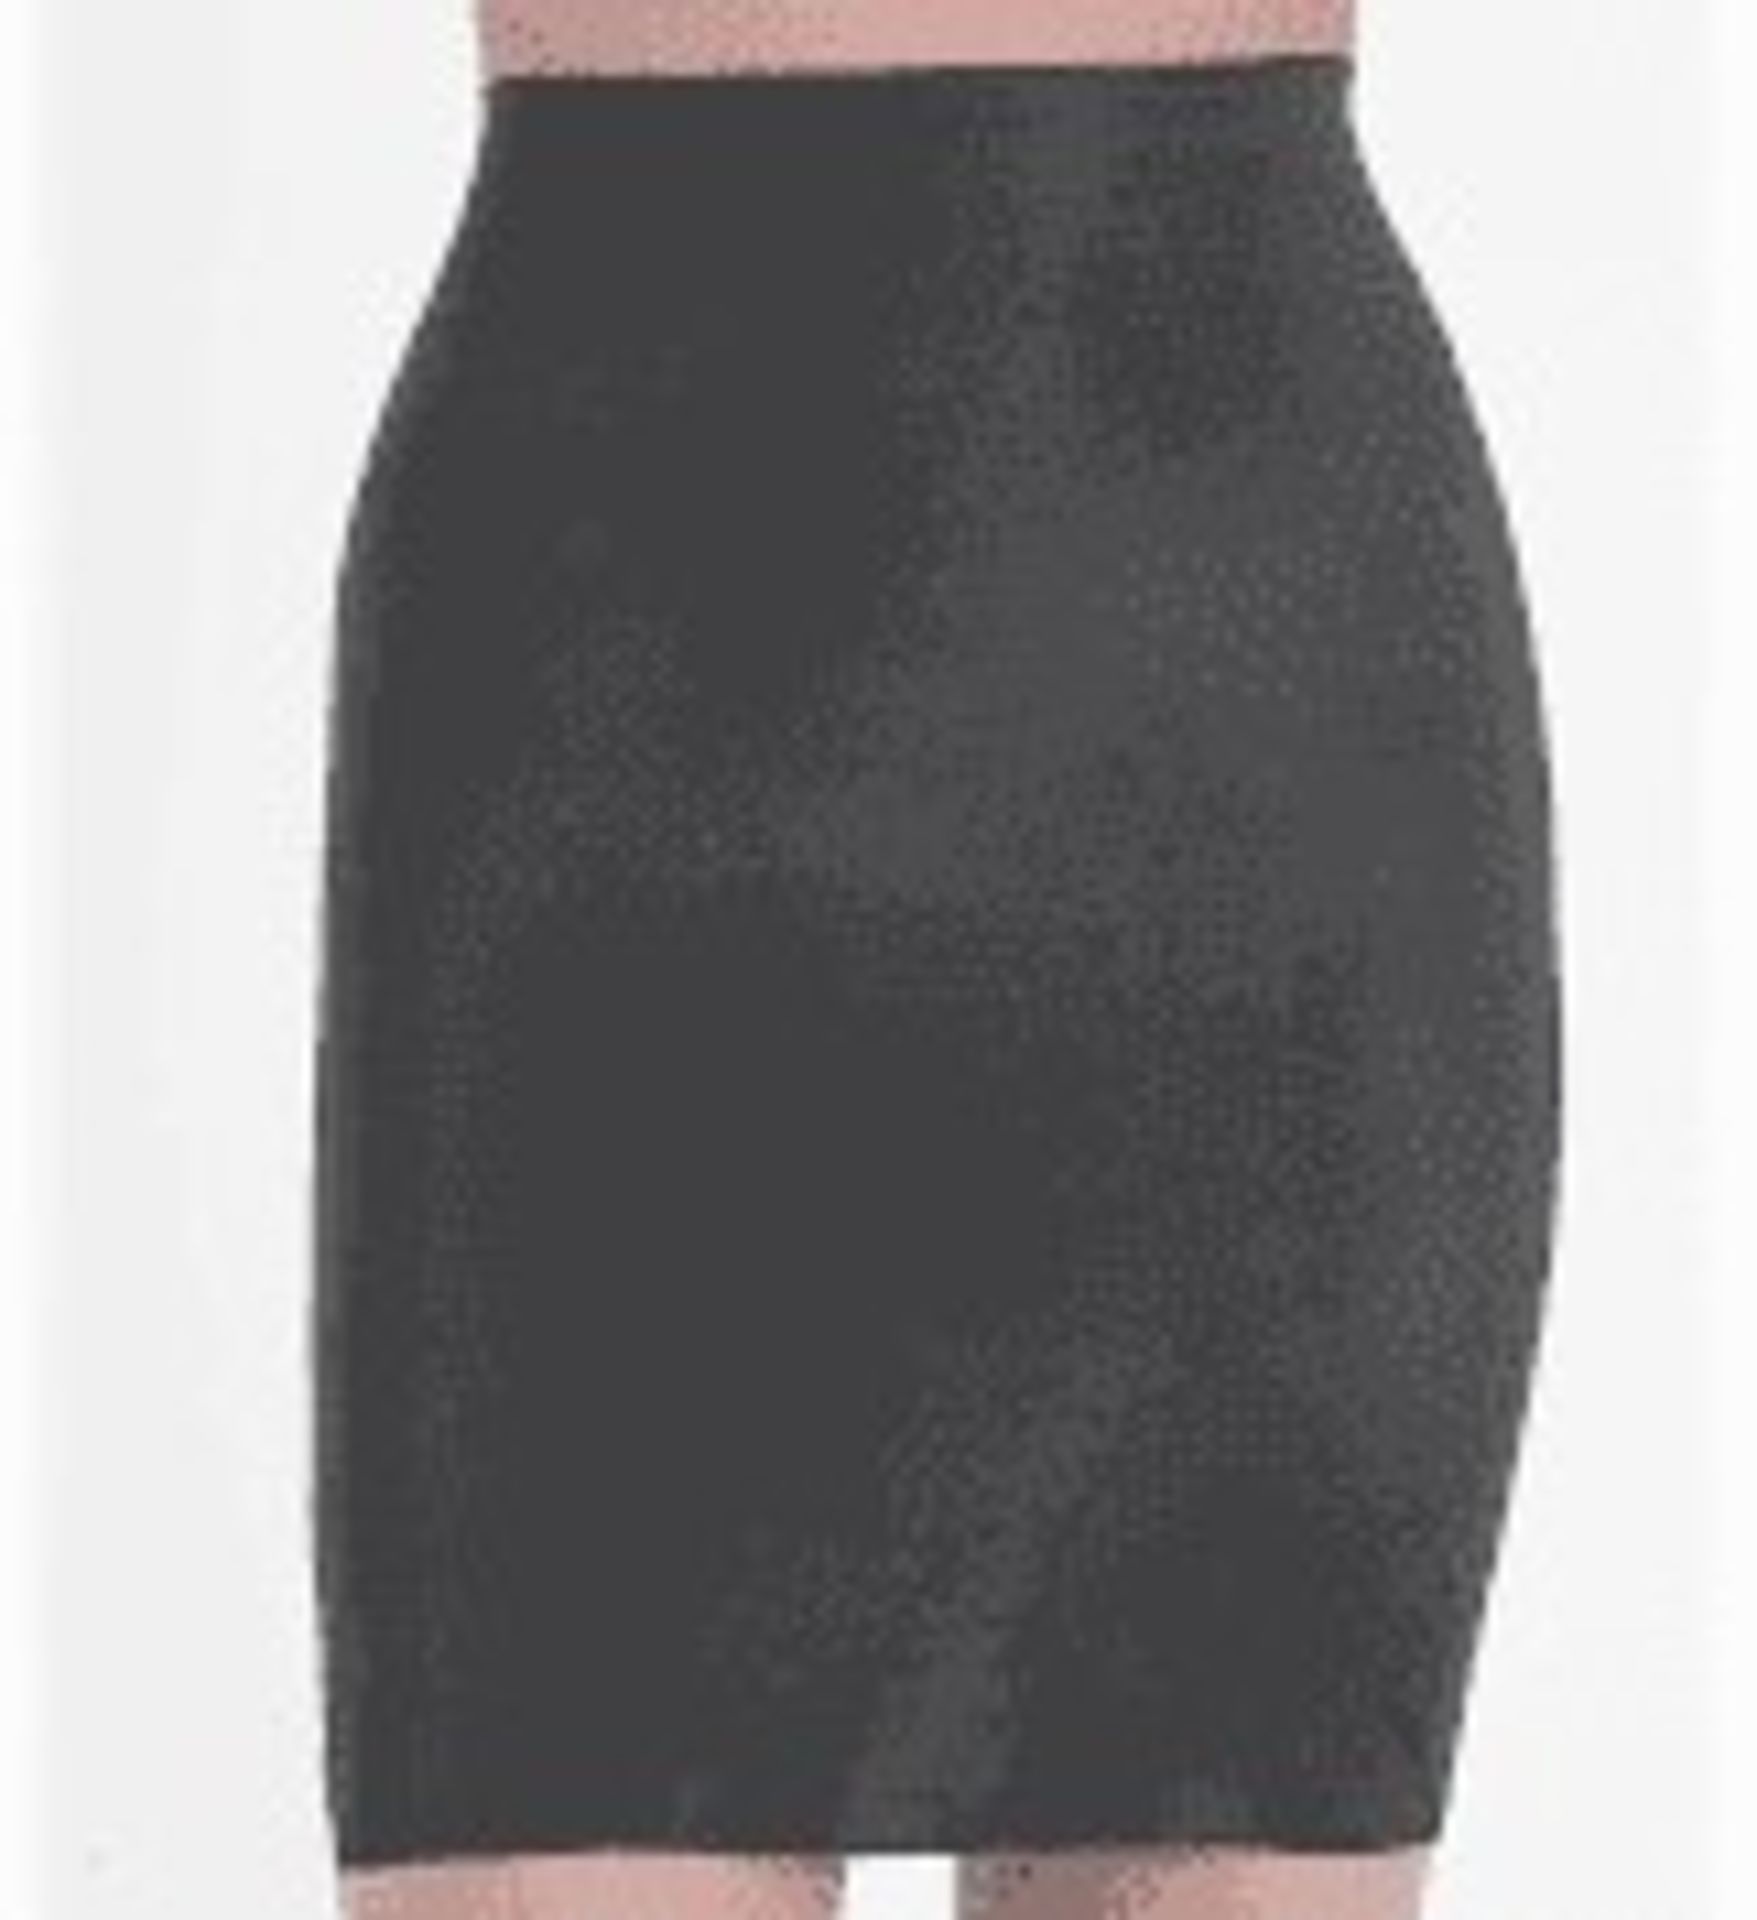 1 LOT TO CONTAIN 5 SPANX SKIRTS IN BLACK / SIZE XLARGE / STYLE 2174 / RRP £240.00 (PUBLIC VIEWING